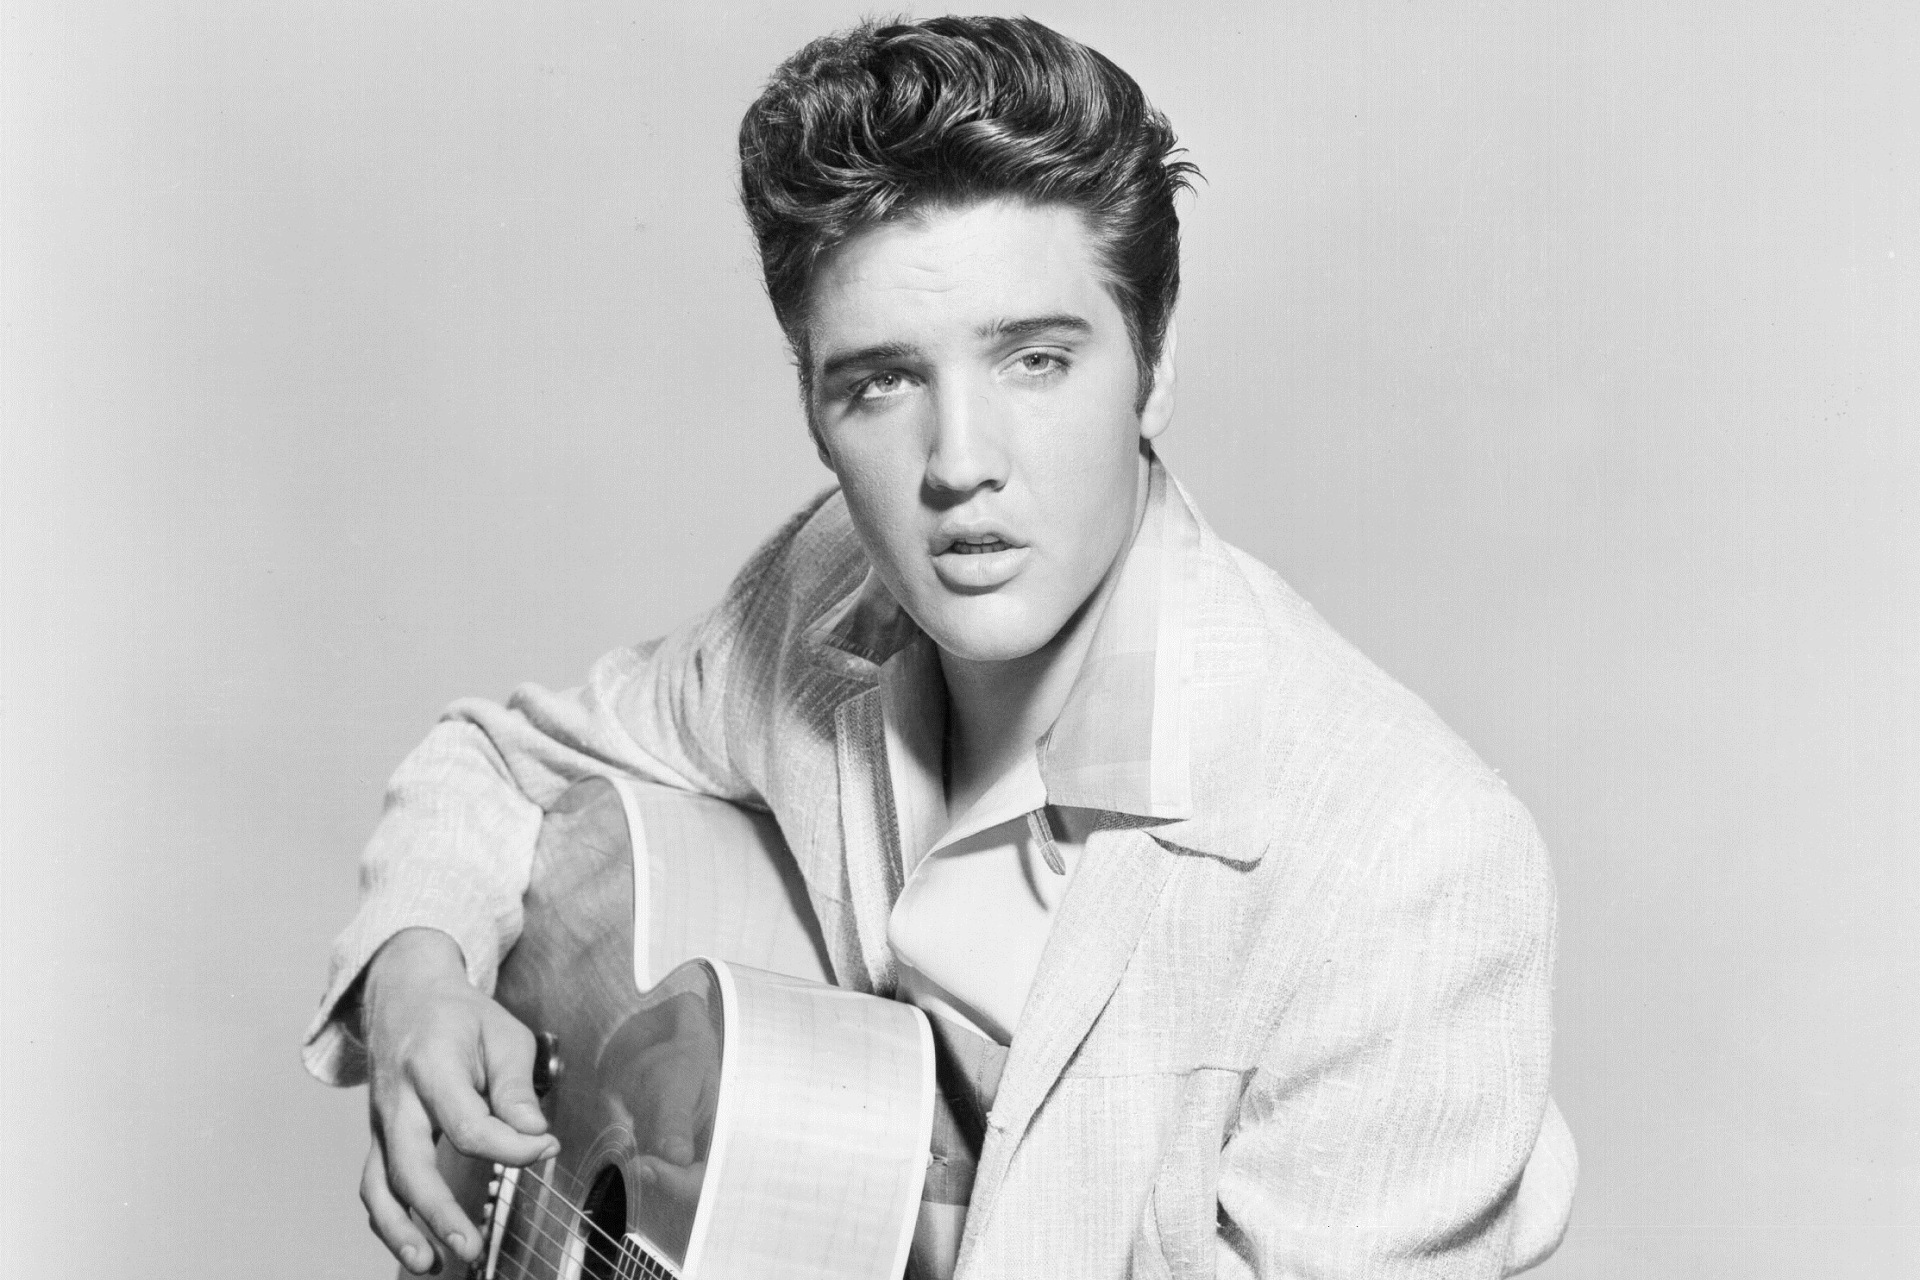 elvis, Presley, Rock, And, Roll, Music, Musician, Singer, Actor, Guitar, Retro, Black, And, White, Eyes, Beautiful Wallpaper